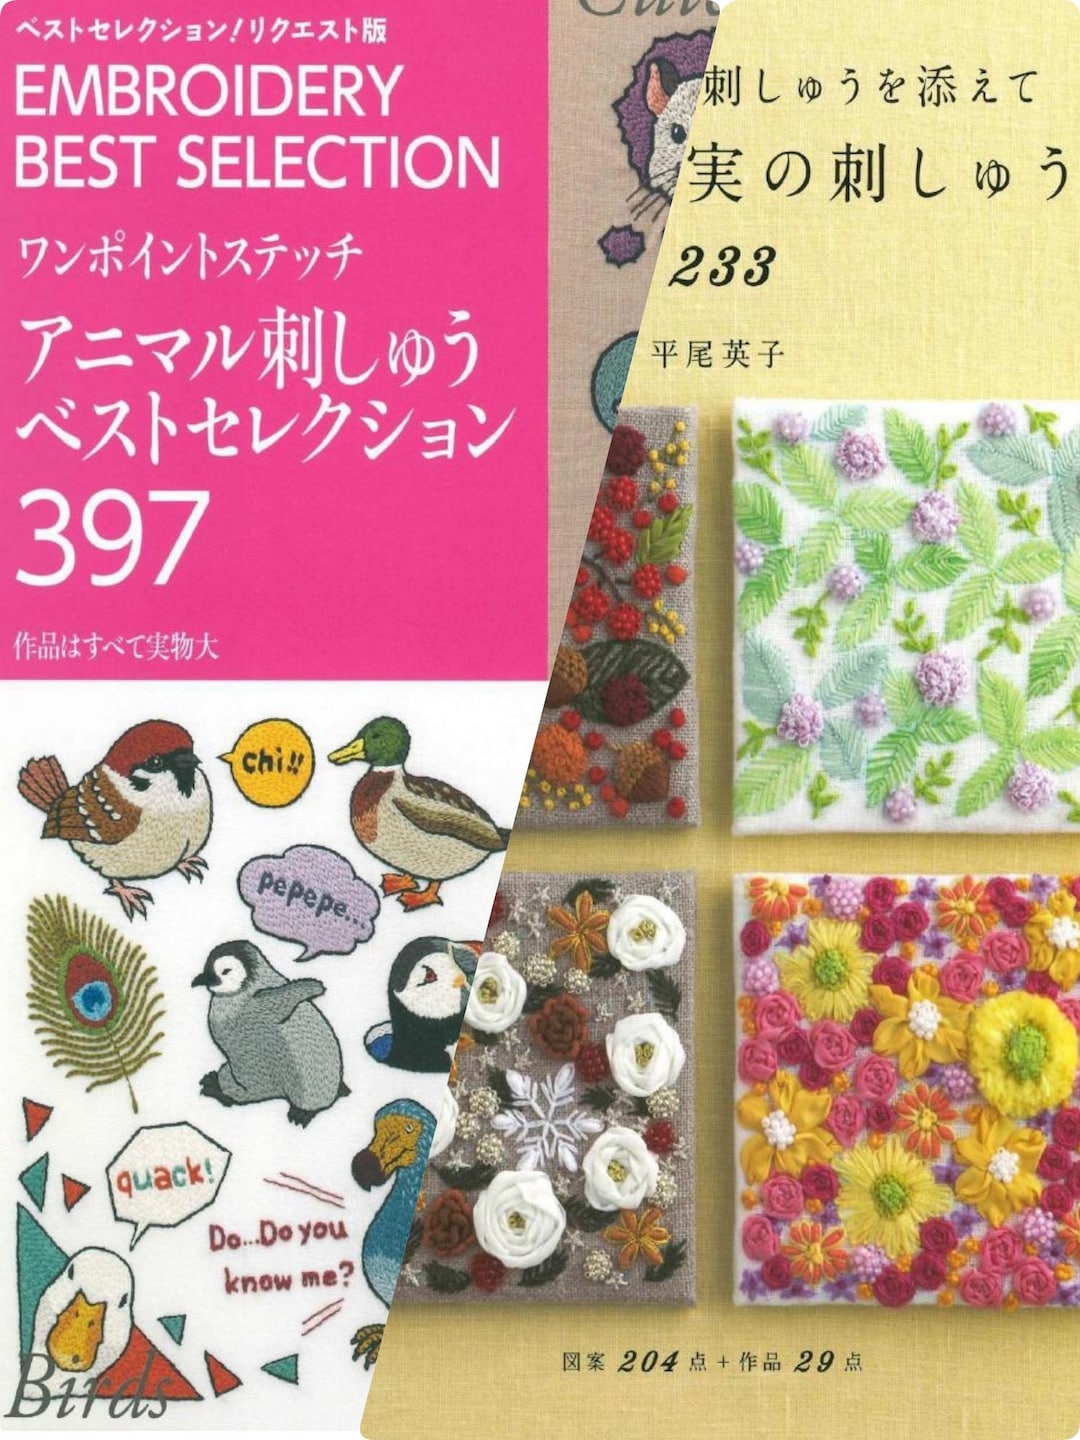 COMBO　Books　Two　Buy　Online　India　Ebook　Embroidery　Flowers　in　Etsy　Animals　Japanese